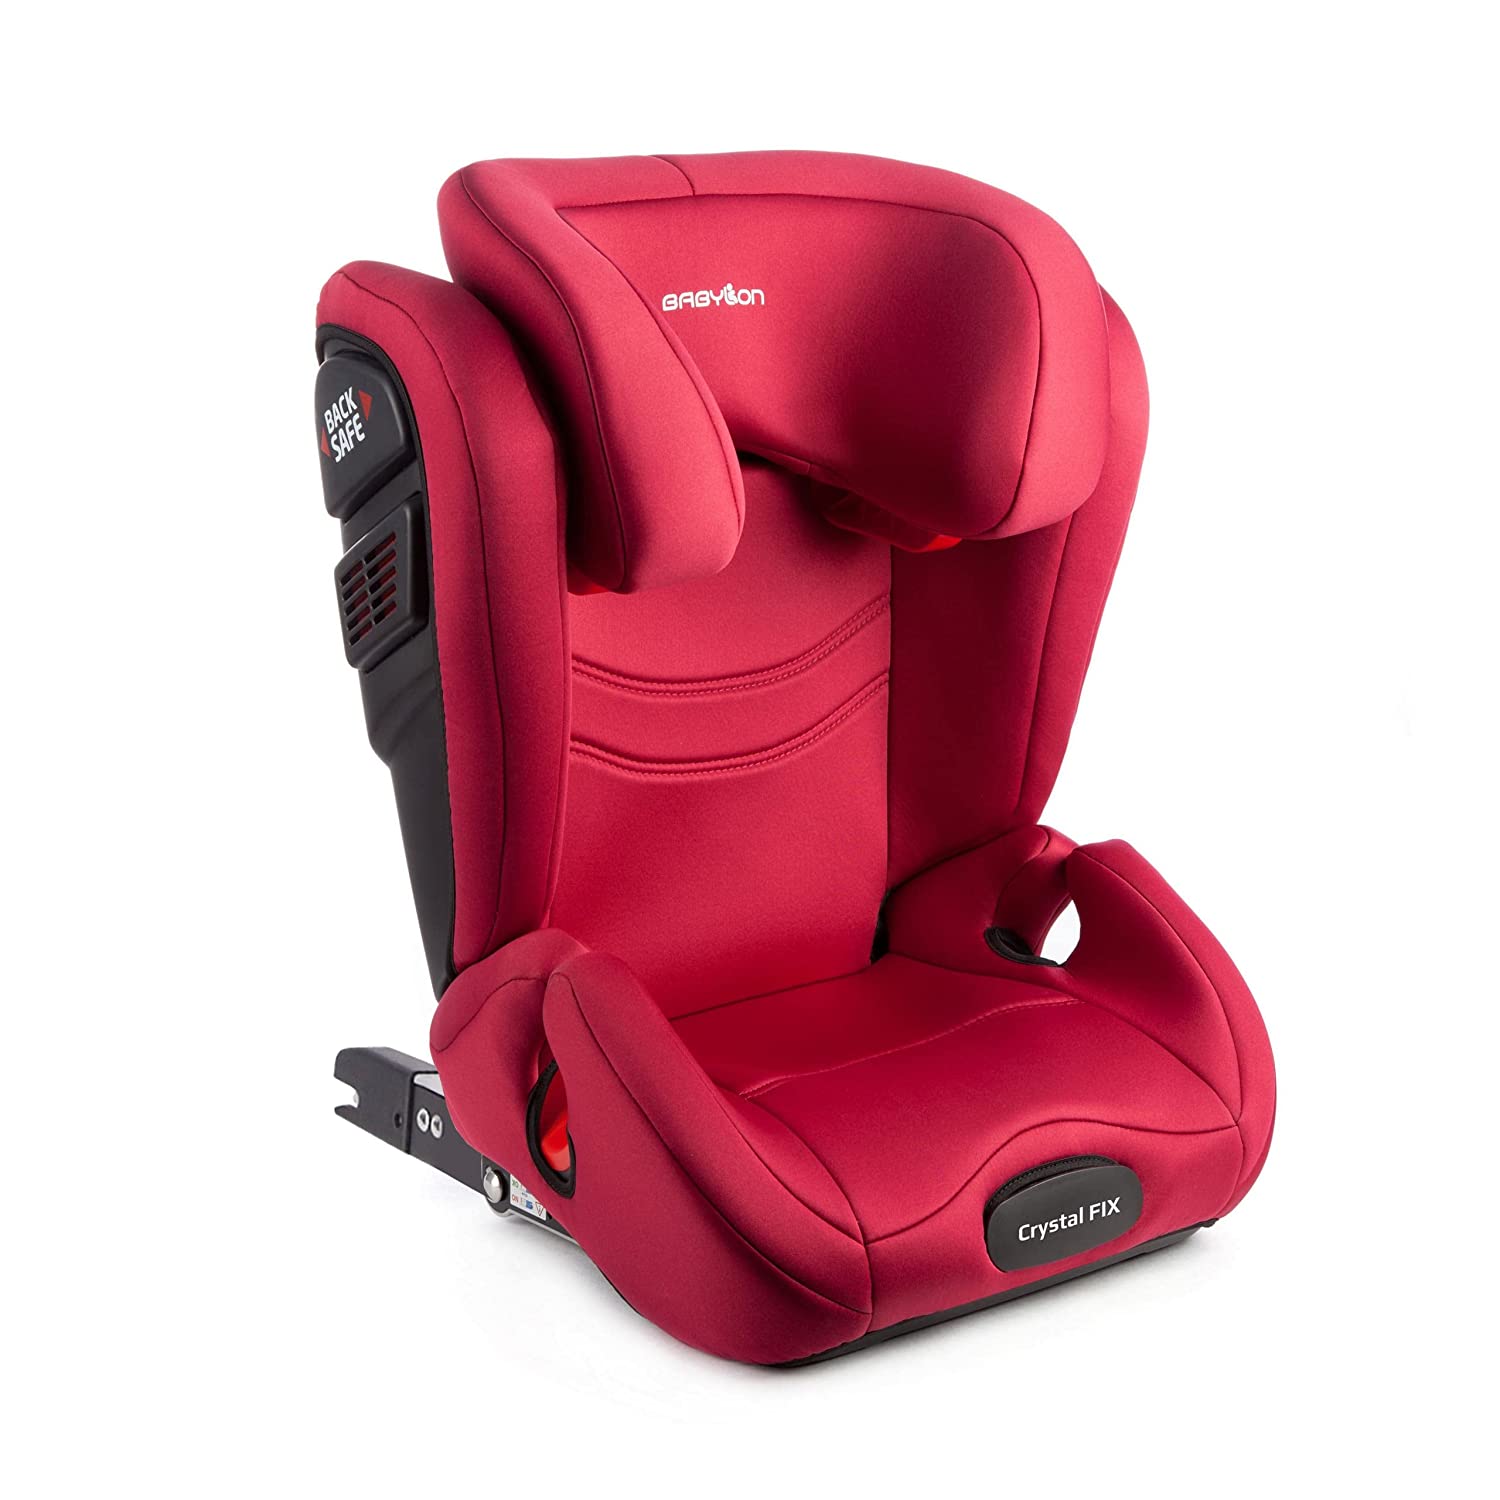 BABYLON Car Seat Crystal Fix Group 2/3 Child Car Seat 15-36 kg (3 to 12 Years) Car Seat Adjustable Headrest Child Seat Isofix ECE R44/04 Red Marsala